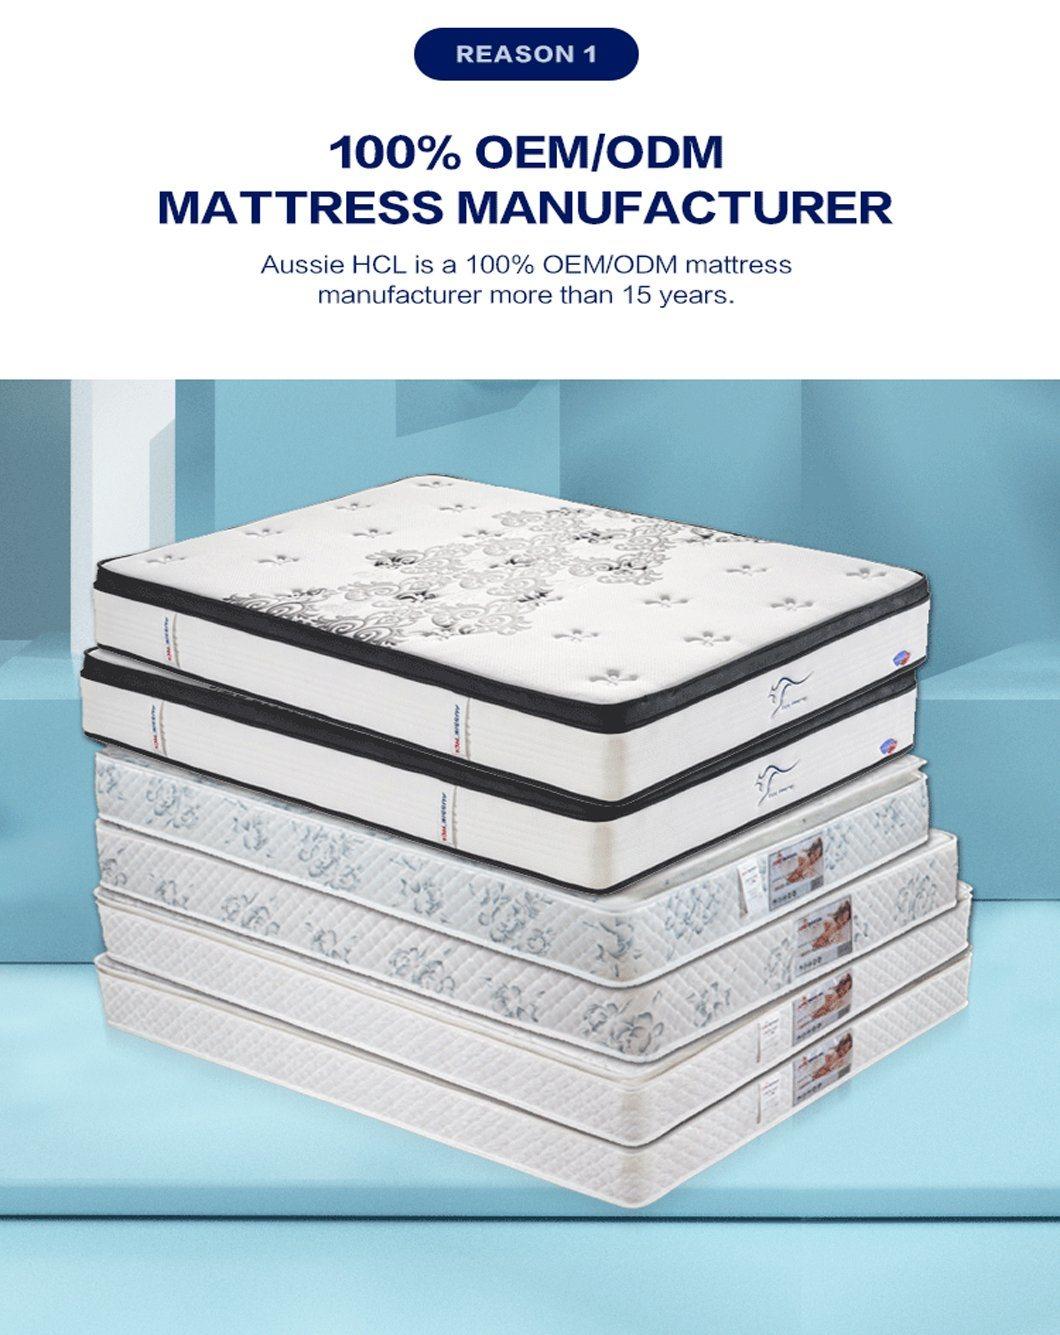 Factory Wholesale Bed Mattresses Queen King Twin Full Size Gel Memory Foam Mattress in a Box for Pressure Relief